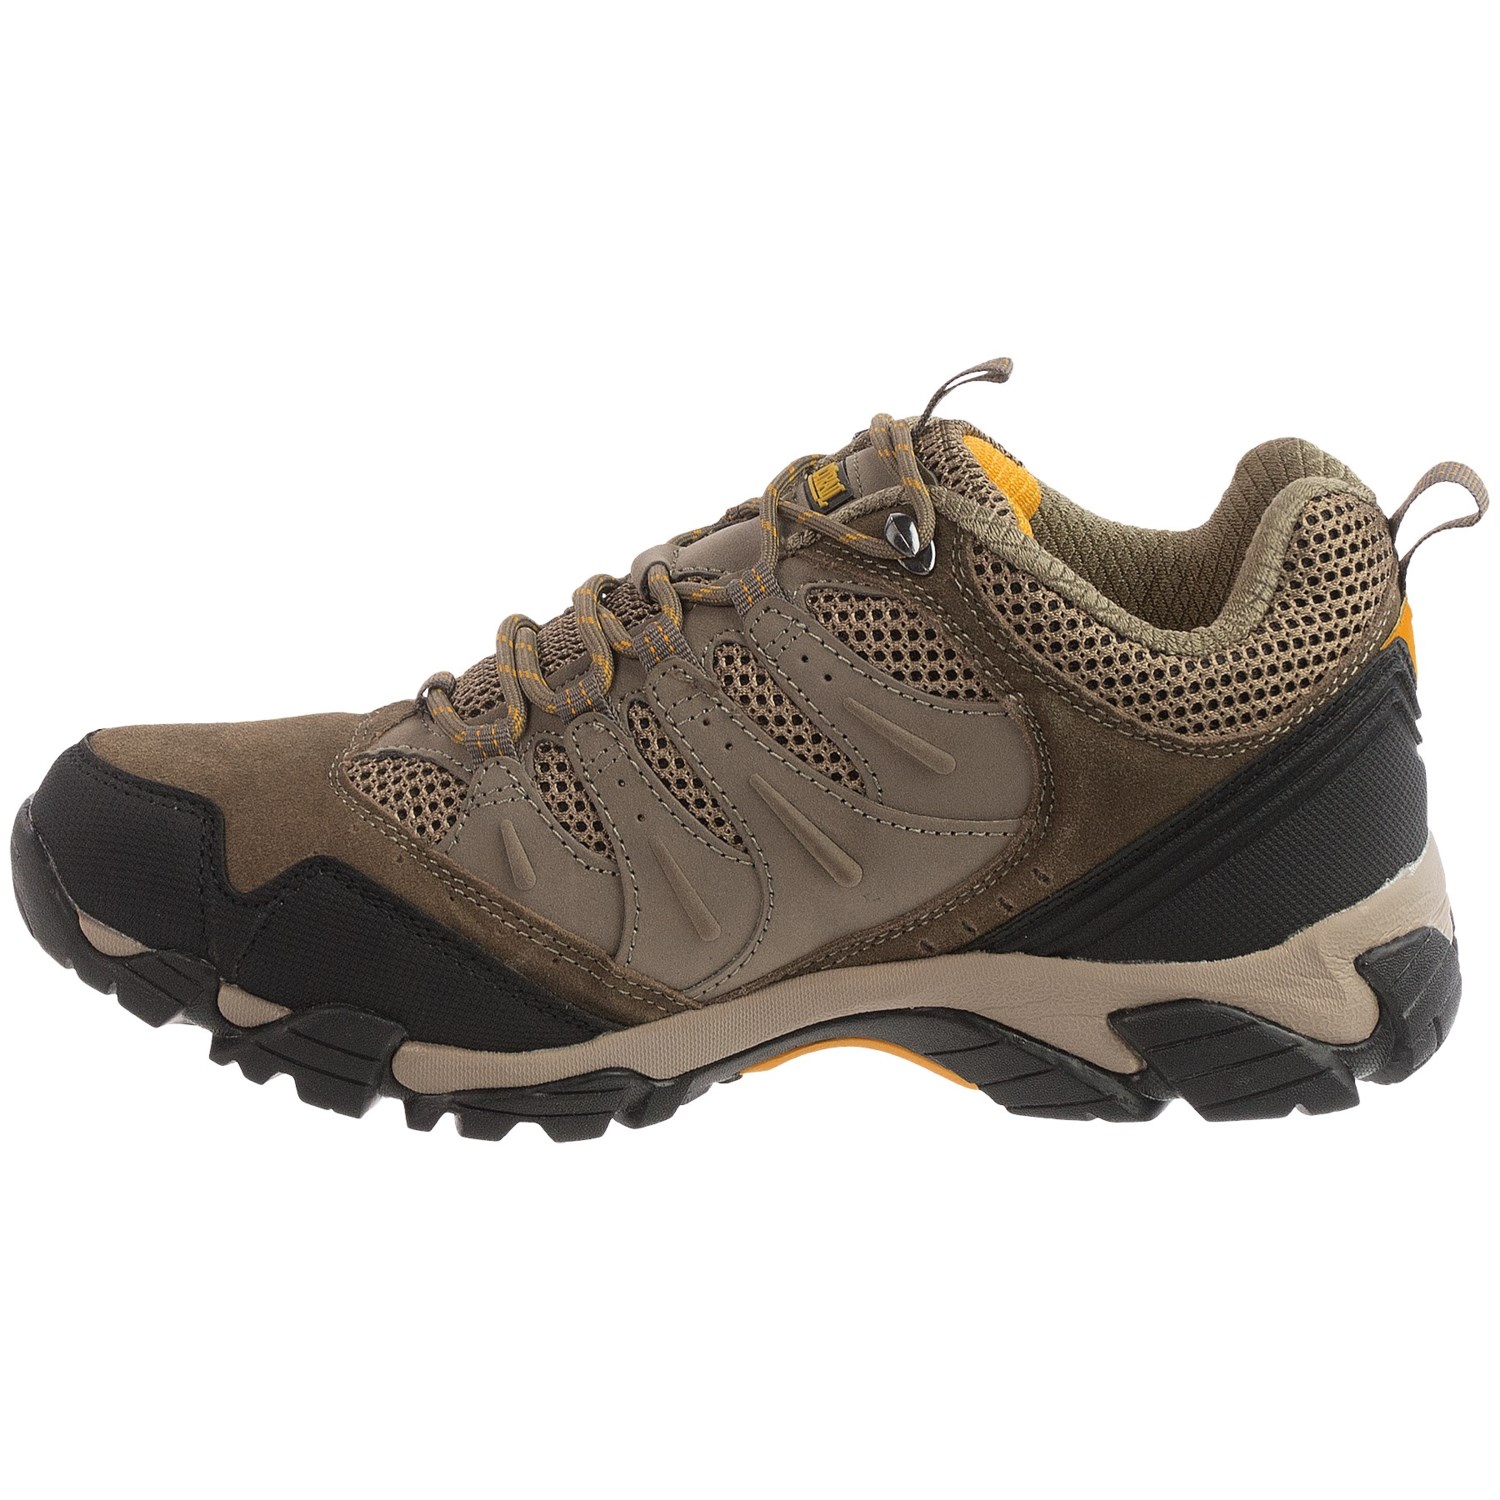 Pacific Trail Whittier Hiking Shoes (For Men) - Save 58%